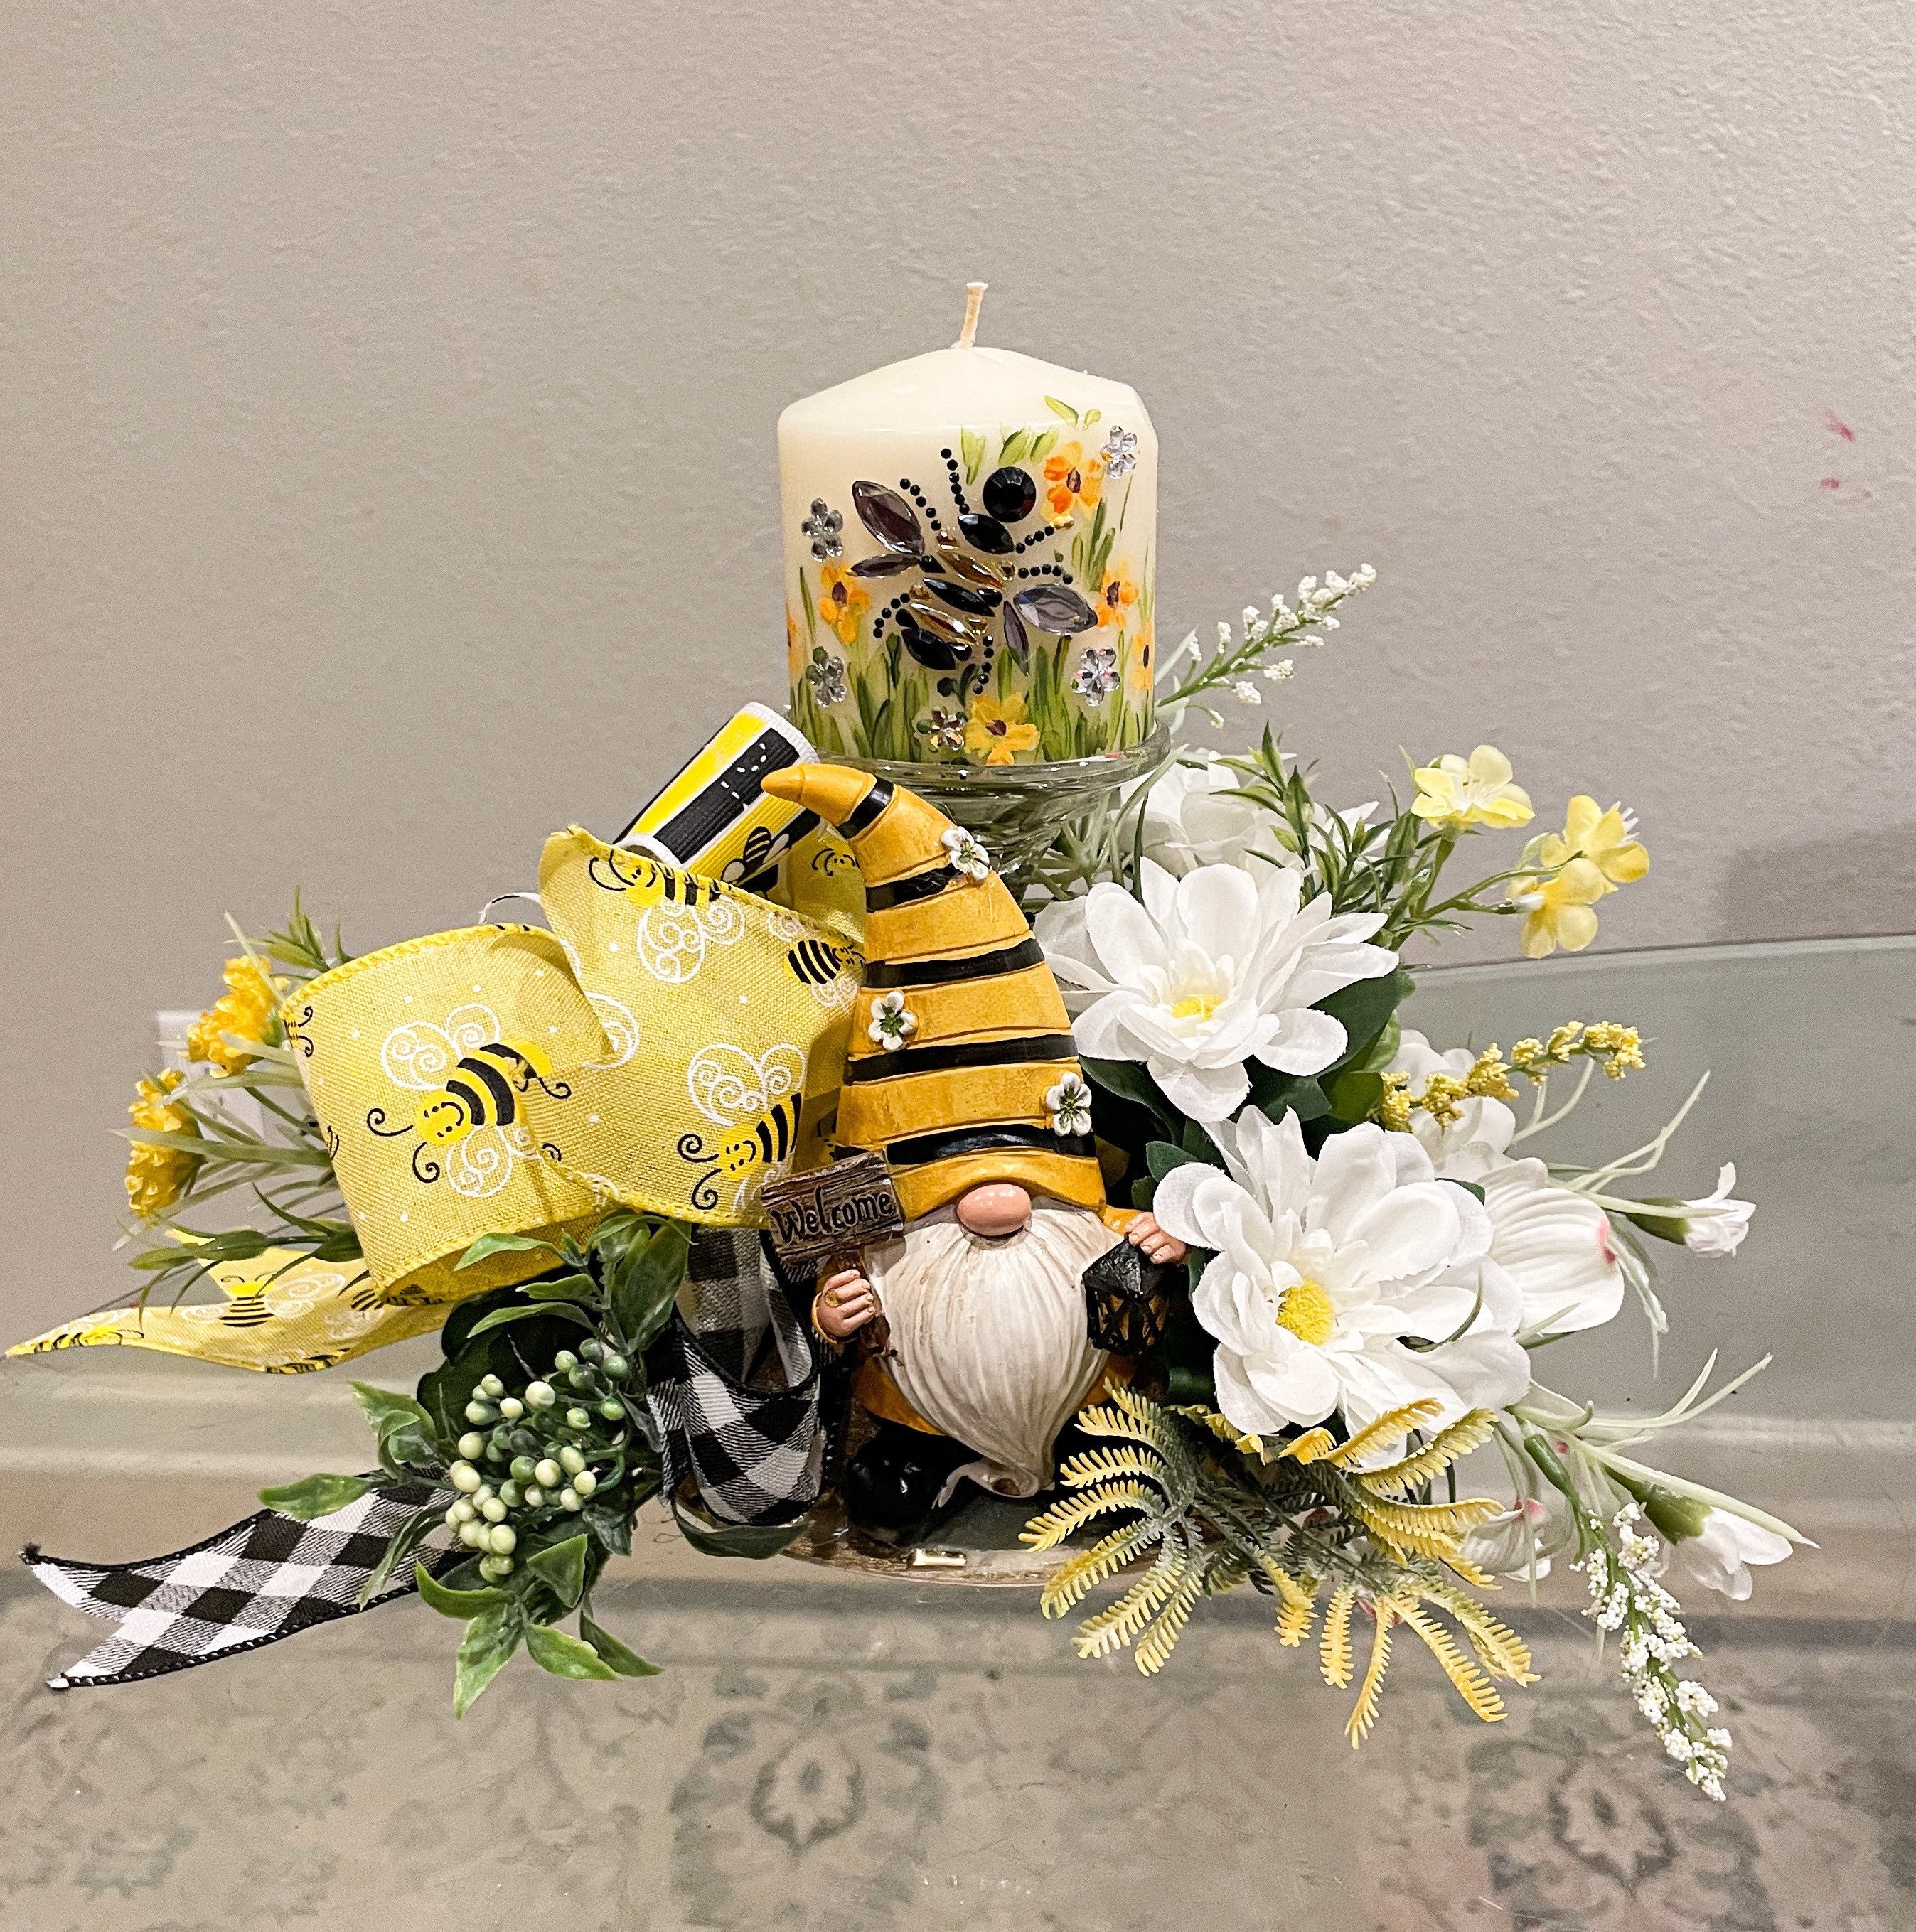 Iopqo Desk Accessories Desk Decor Bumble Bee Striped Honey Bee Home Kitchen Decor Bee Shelf Sitter Tiered Tray Display Spring Coffee Table Decor